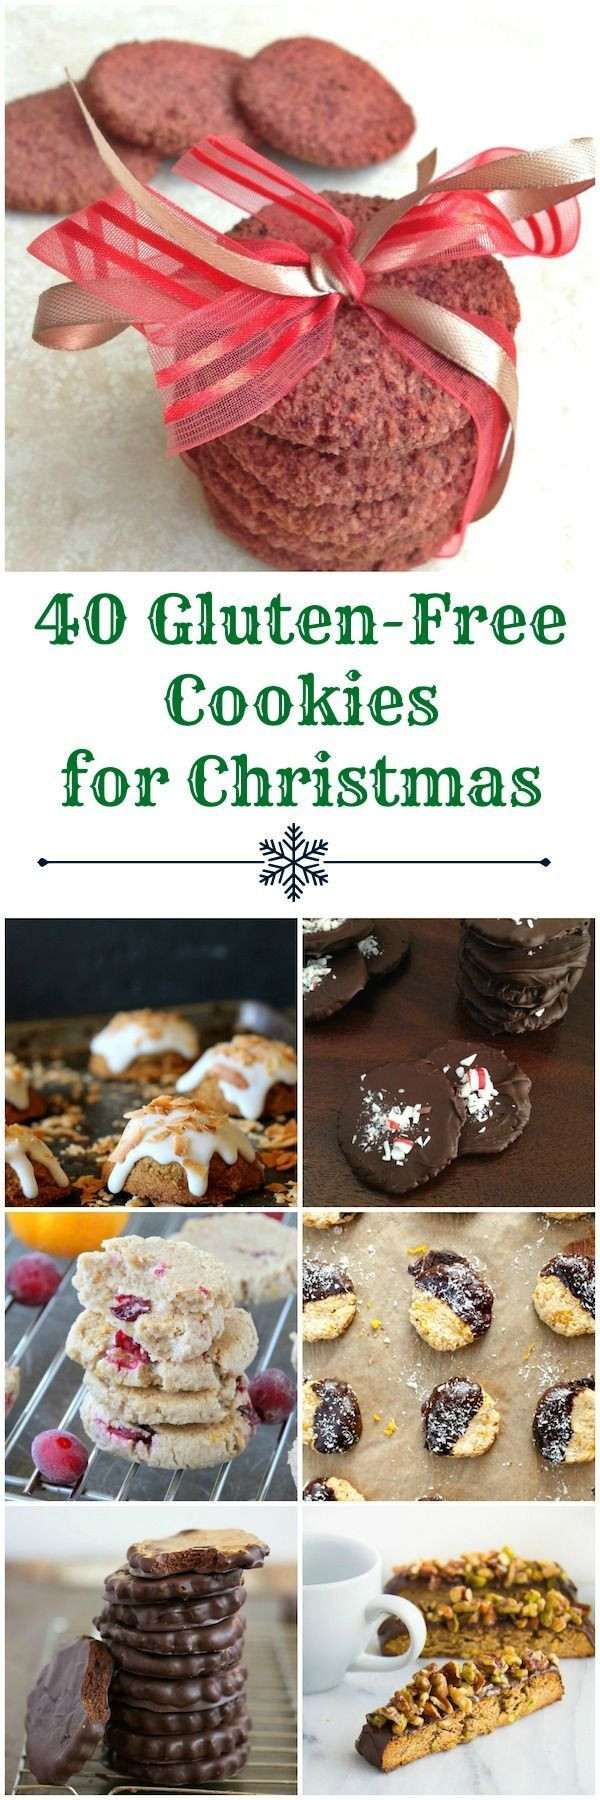 Gluten Free Christmas Cookies Recipes
 1000 images about Advent Weihnachten Winter on Pinterest